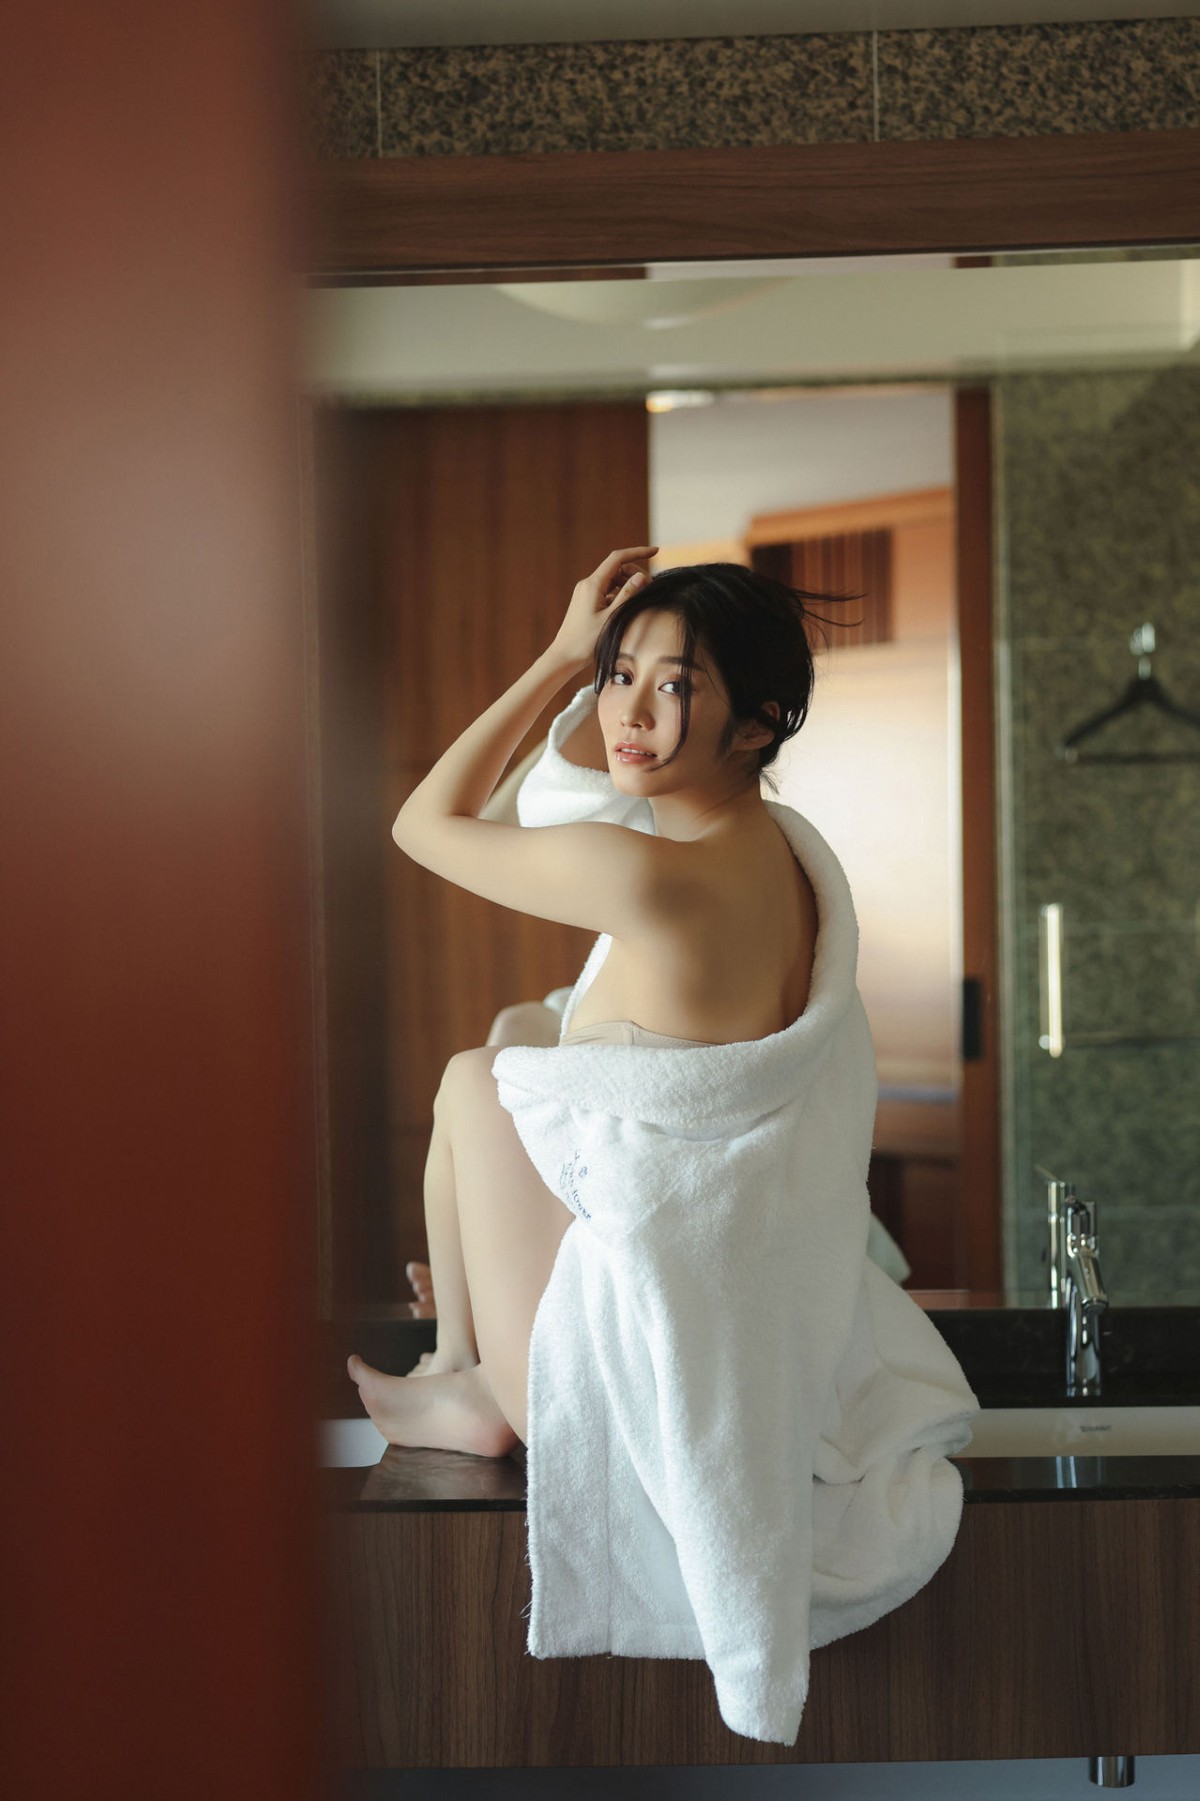 FRIDAY Digital Photobook 2023 02 10 Rin Takahashi 高橋凛 In A Suite Room With An I Cup Beauty Vol 2 0030 5479032588.jpg